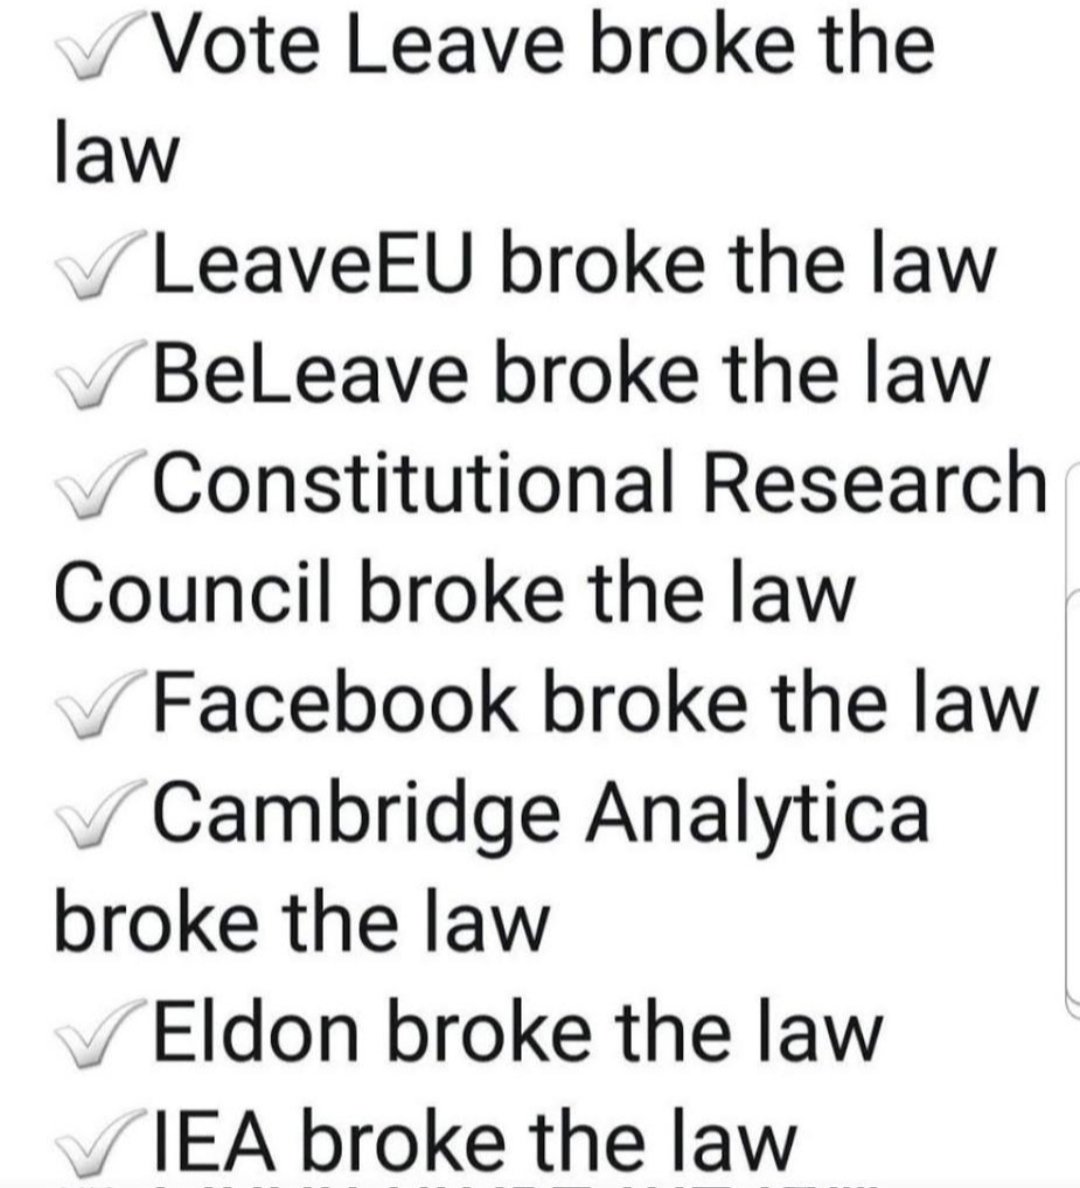 @KymYSmith @bernie_ran3443 Can't trust the electoral commission to run a lawful vote either. #Brexit proved that despite *every* 'leave' outfit breaking the law, it still just slid through without a whimper.